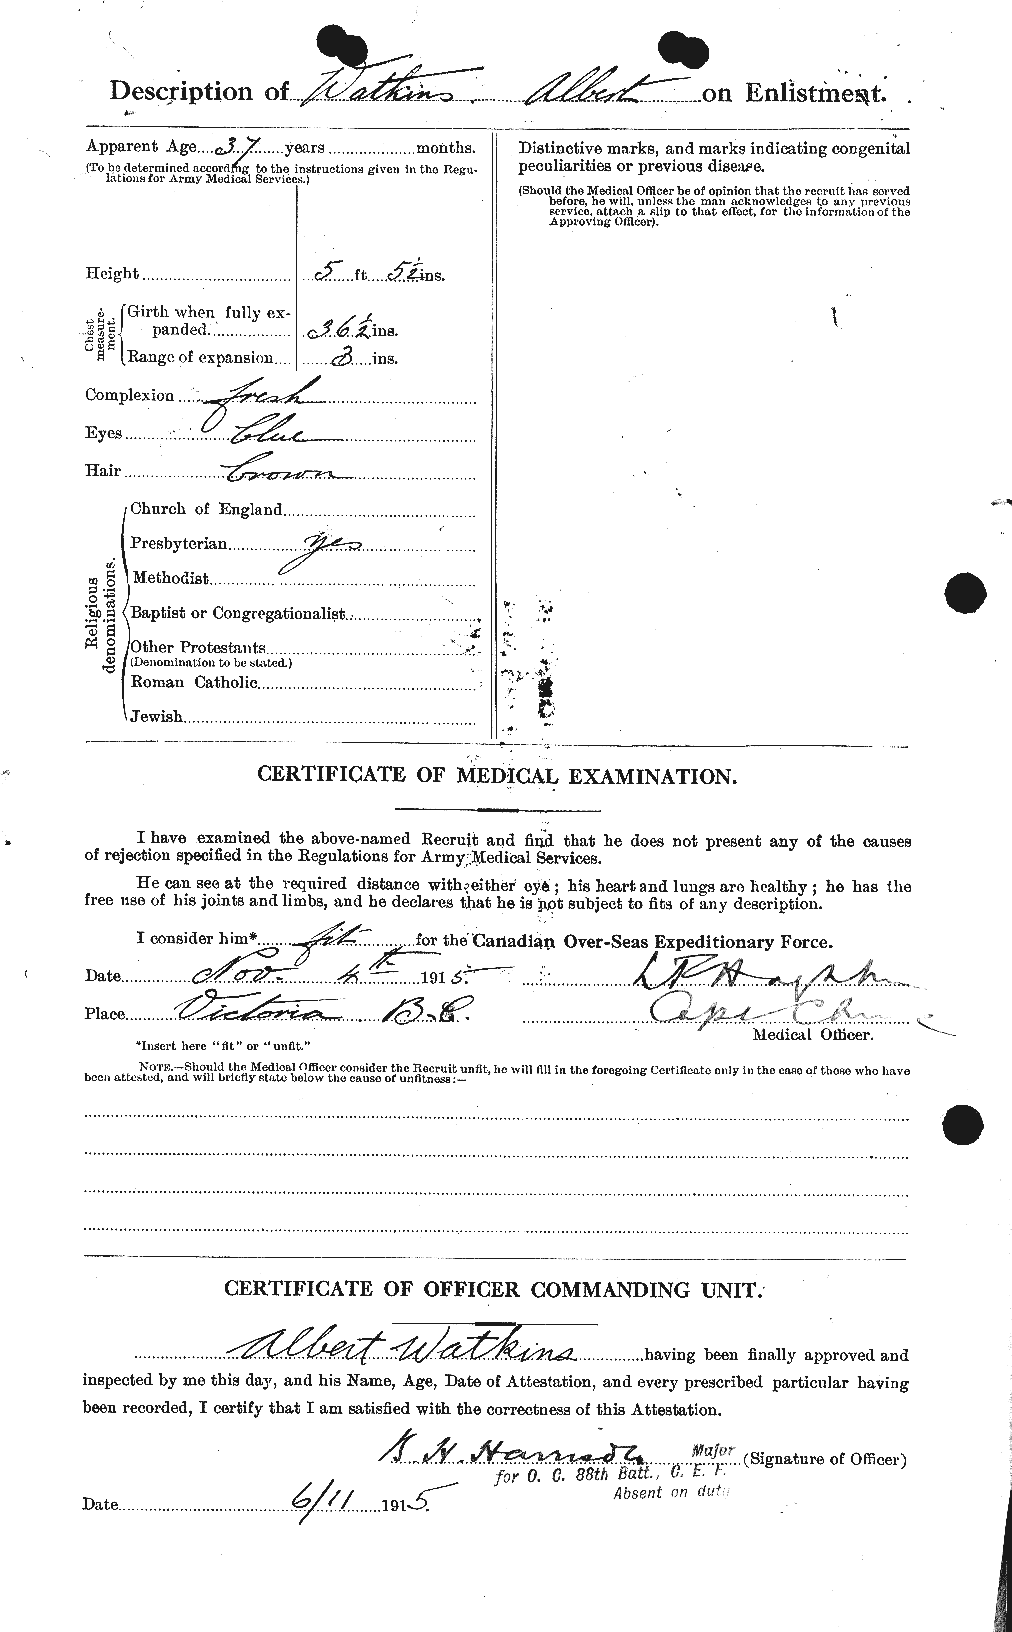 Personnel Records of the First World War - CEF 659149b